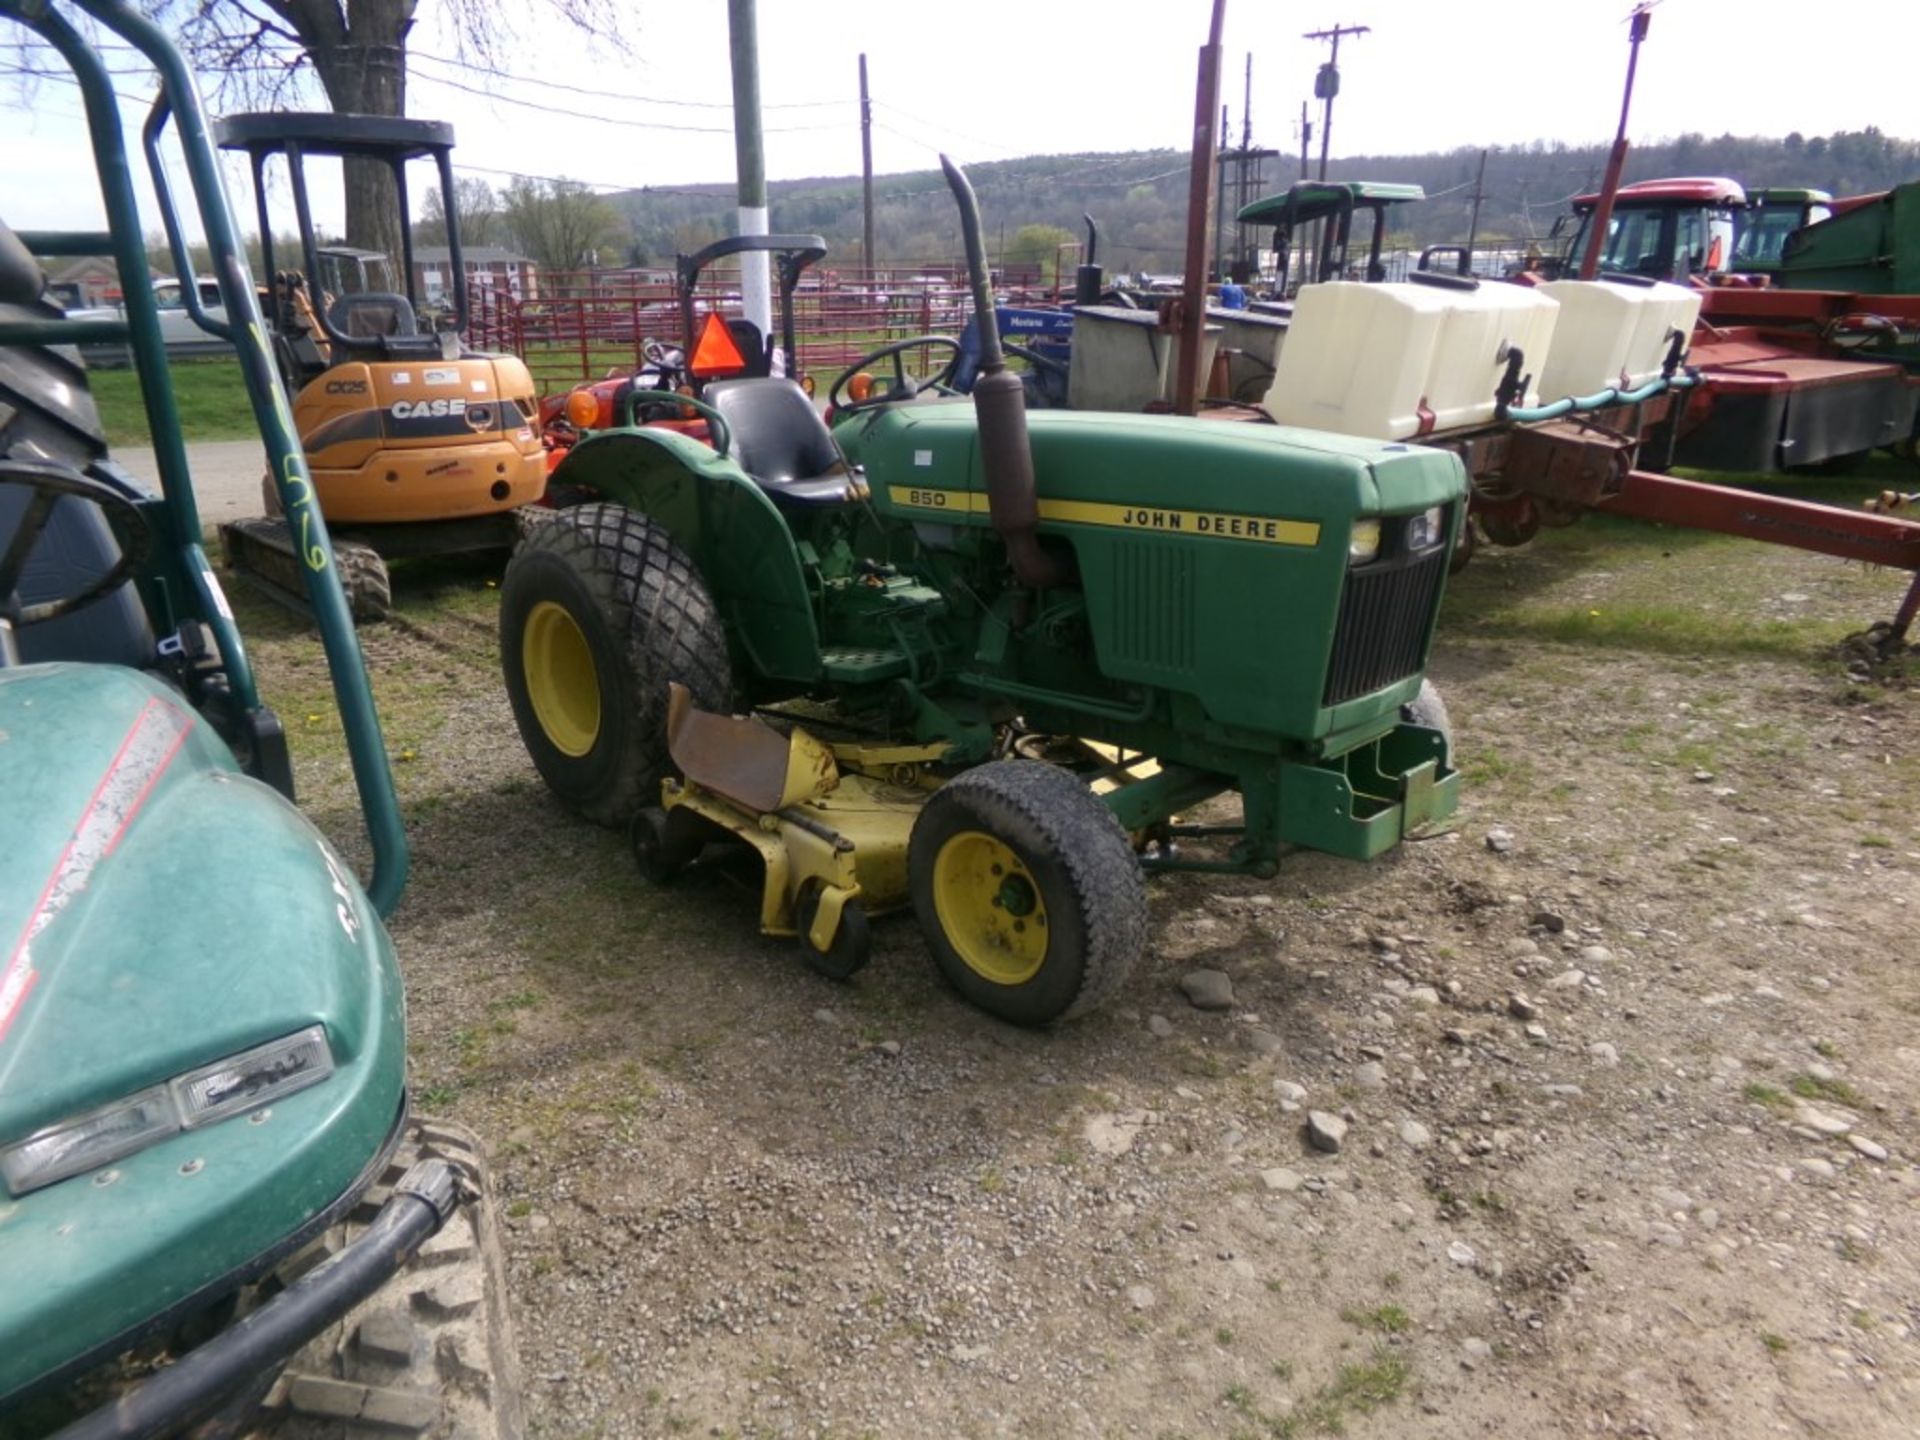 John Deere 850 2 WD Tractor with 72'' Belly Mower, 3970, MISSING 3 PT ARMS (5765) - Image 2 of 3